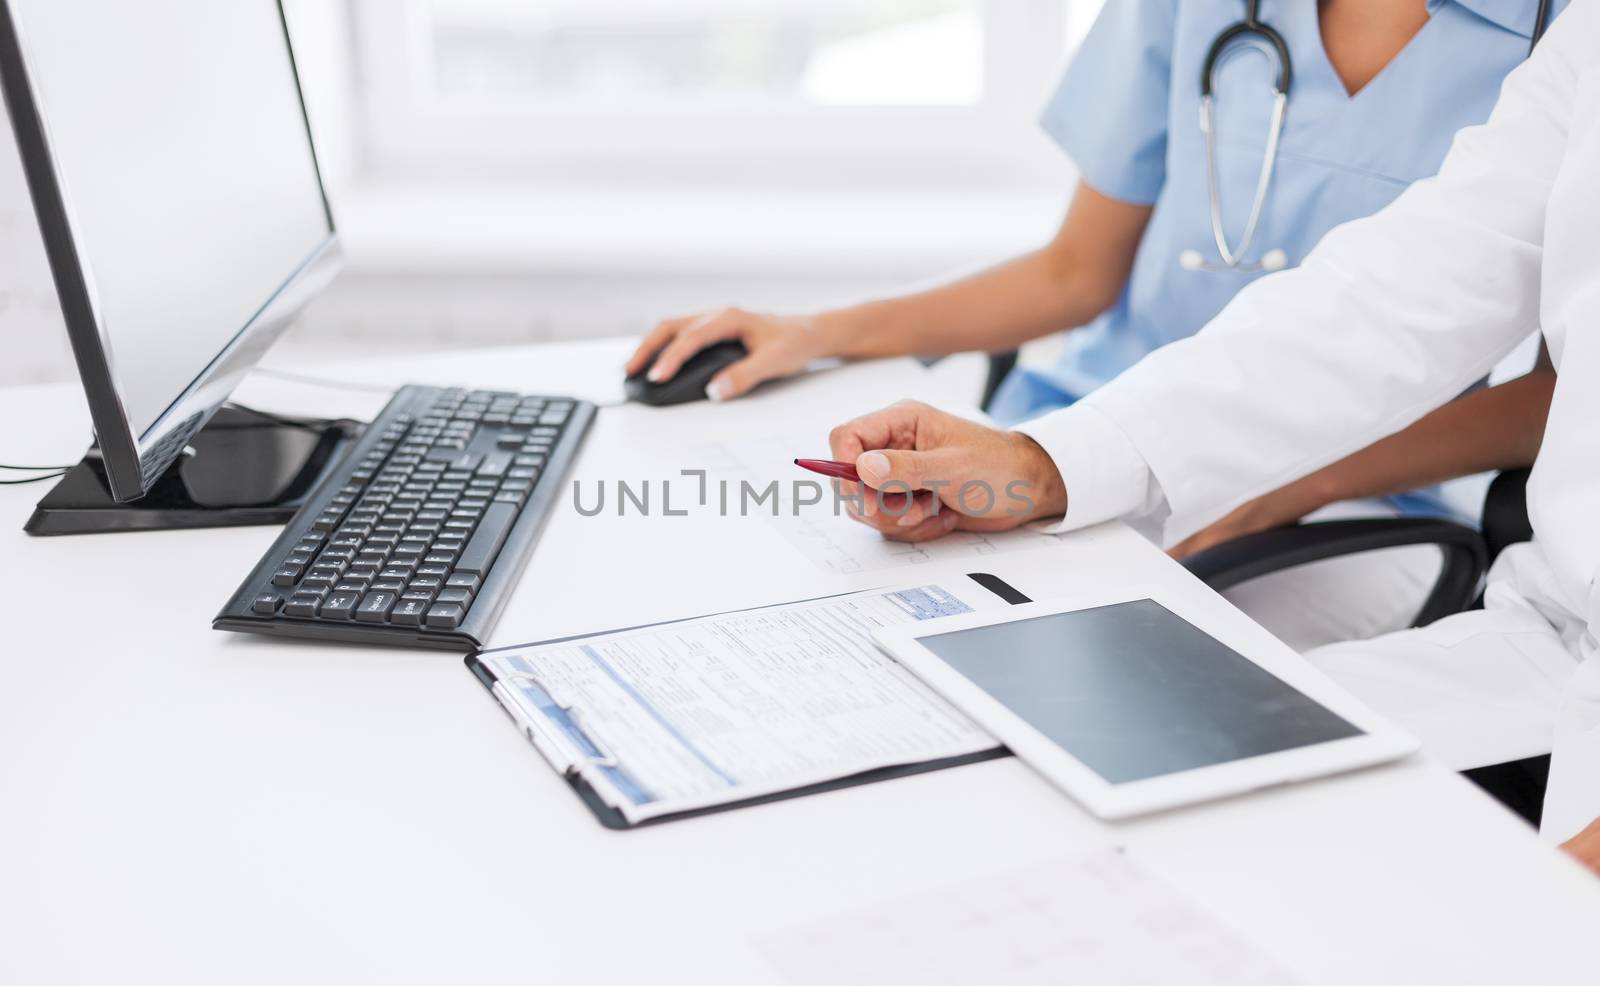 group of doctors looking at tablet pc by dolgachov